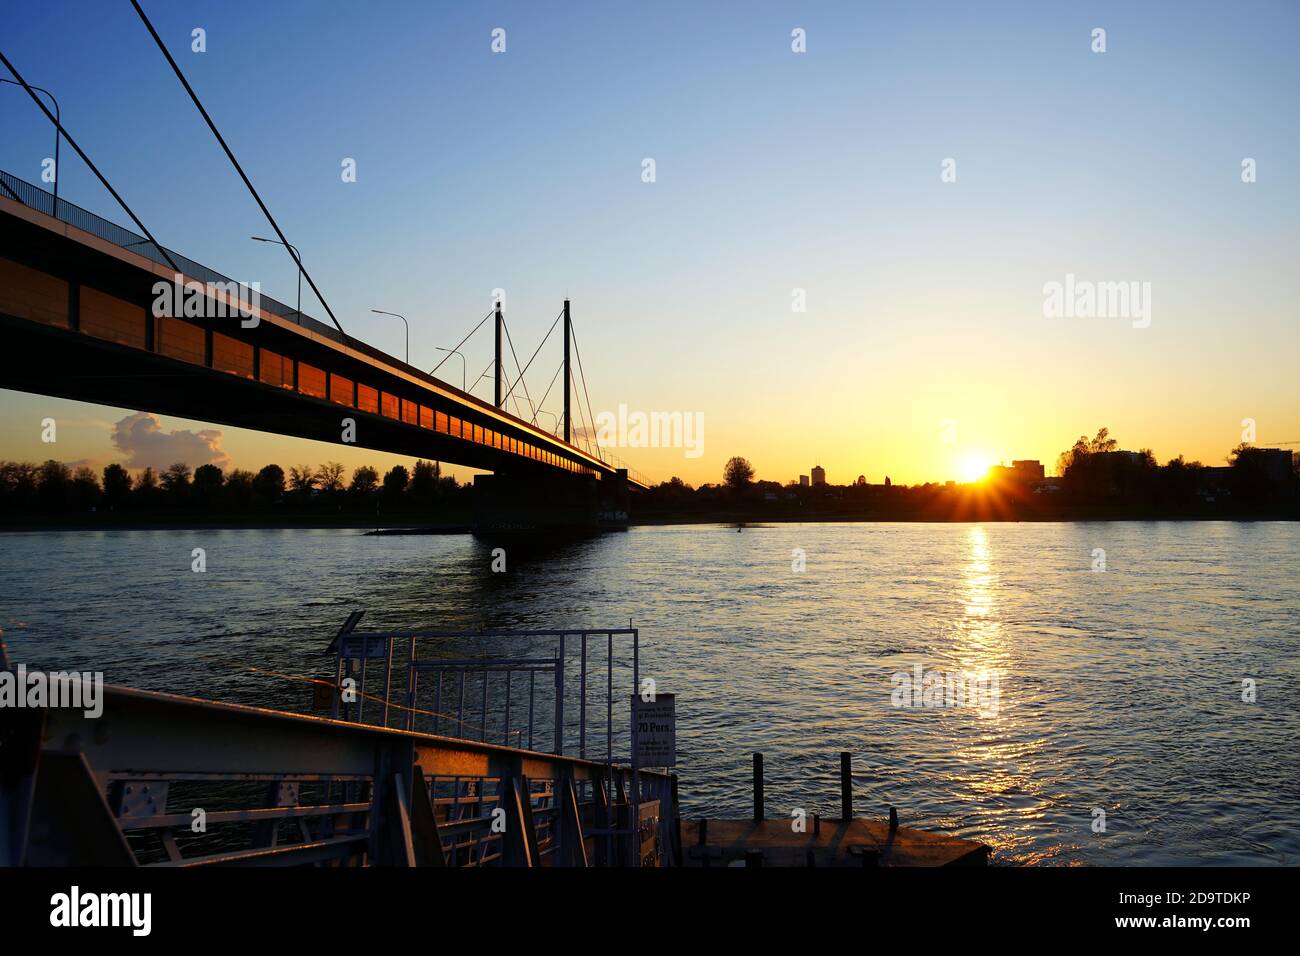 Theodor-Heuss-Brücke, a cable-stayed bridge that crosses Rhine river. Photo taken from the river bank in the district of Golzheim. Stock Photo